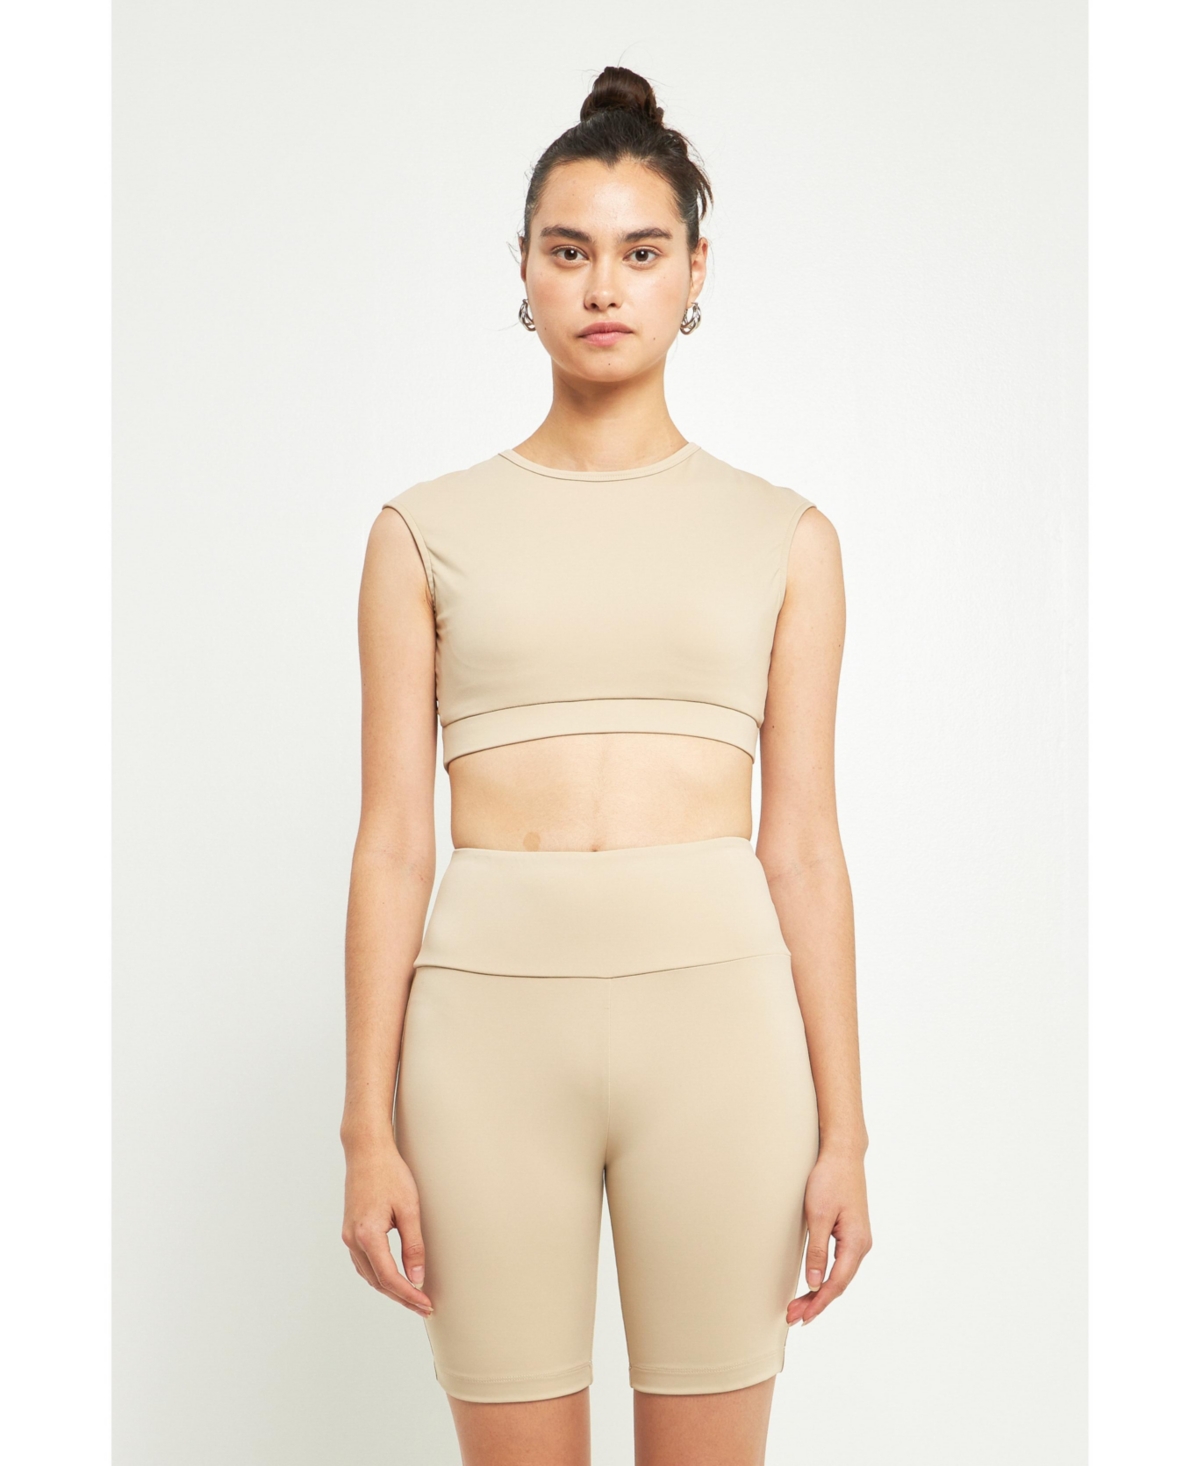 Strappy Back Crop Top